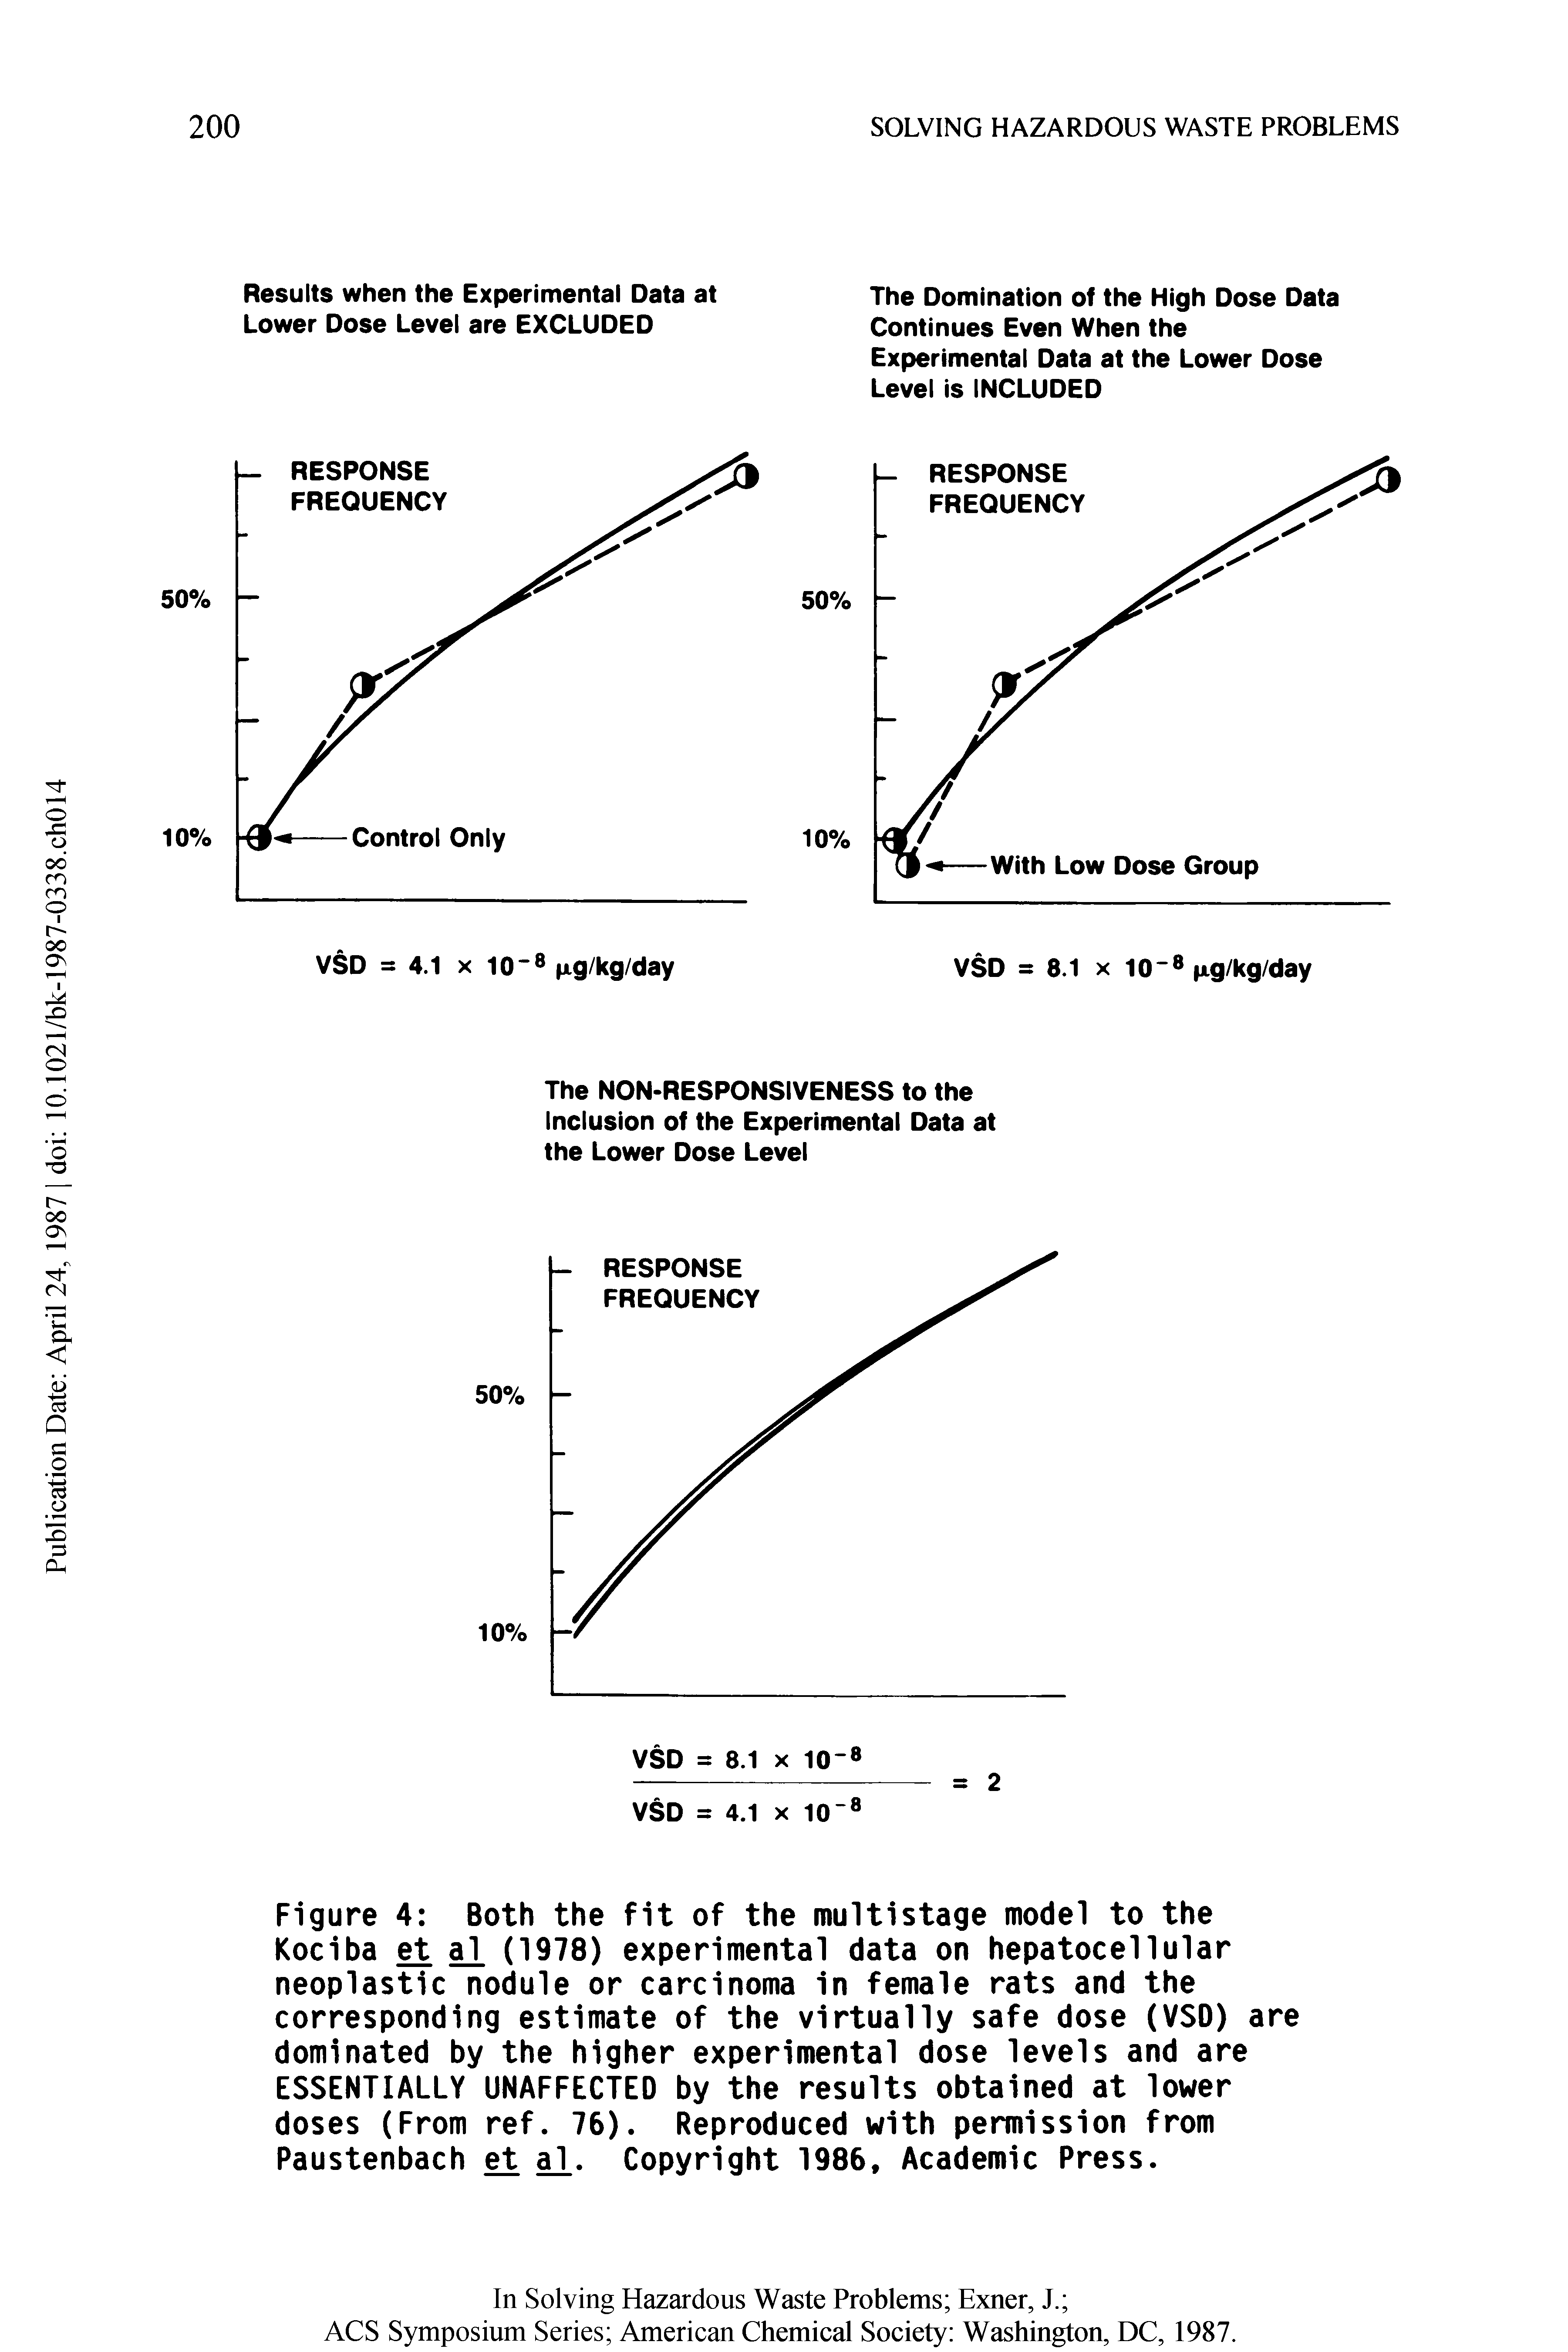 Figure 4 Both the fit of the multistage model to the Kociba et al (1978) experimental data on hepatocellular neoplastic nodule or carcinoma in female rats and the corresponding estimate of the virtually safe dose (VSD) are dominated by the higher experimental dose levels and are ESSENTIALLY UNAFFECTED by the results obtained at lower doses (From ref. 76). Reproduced with permission from Paustenbach et al. Copyright 1986, Academic Press.